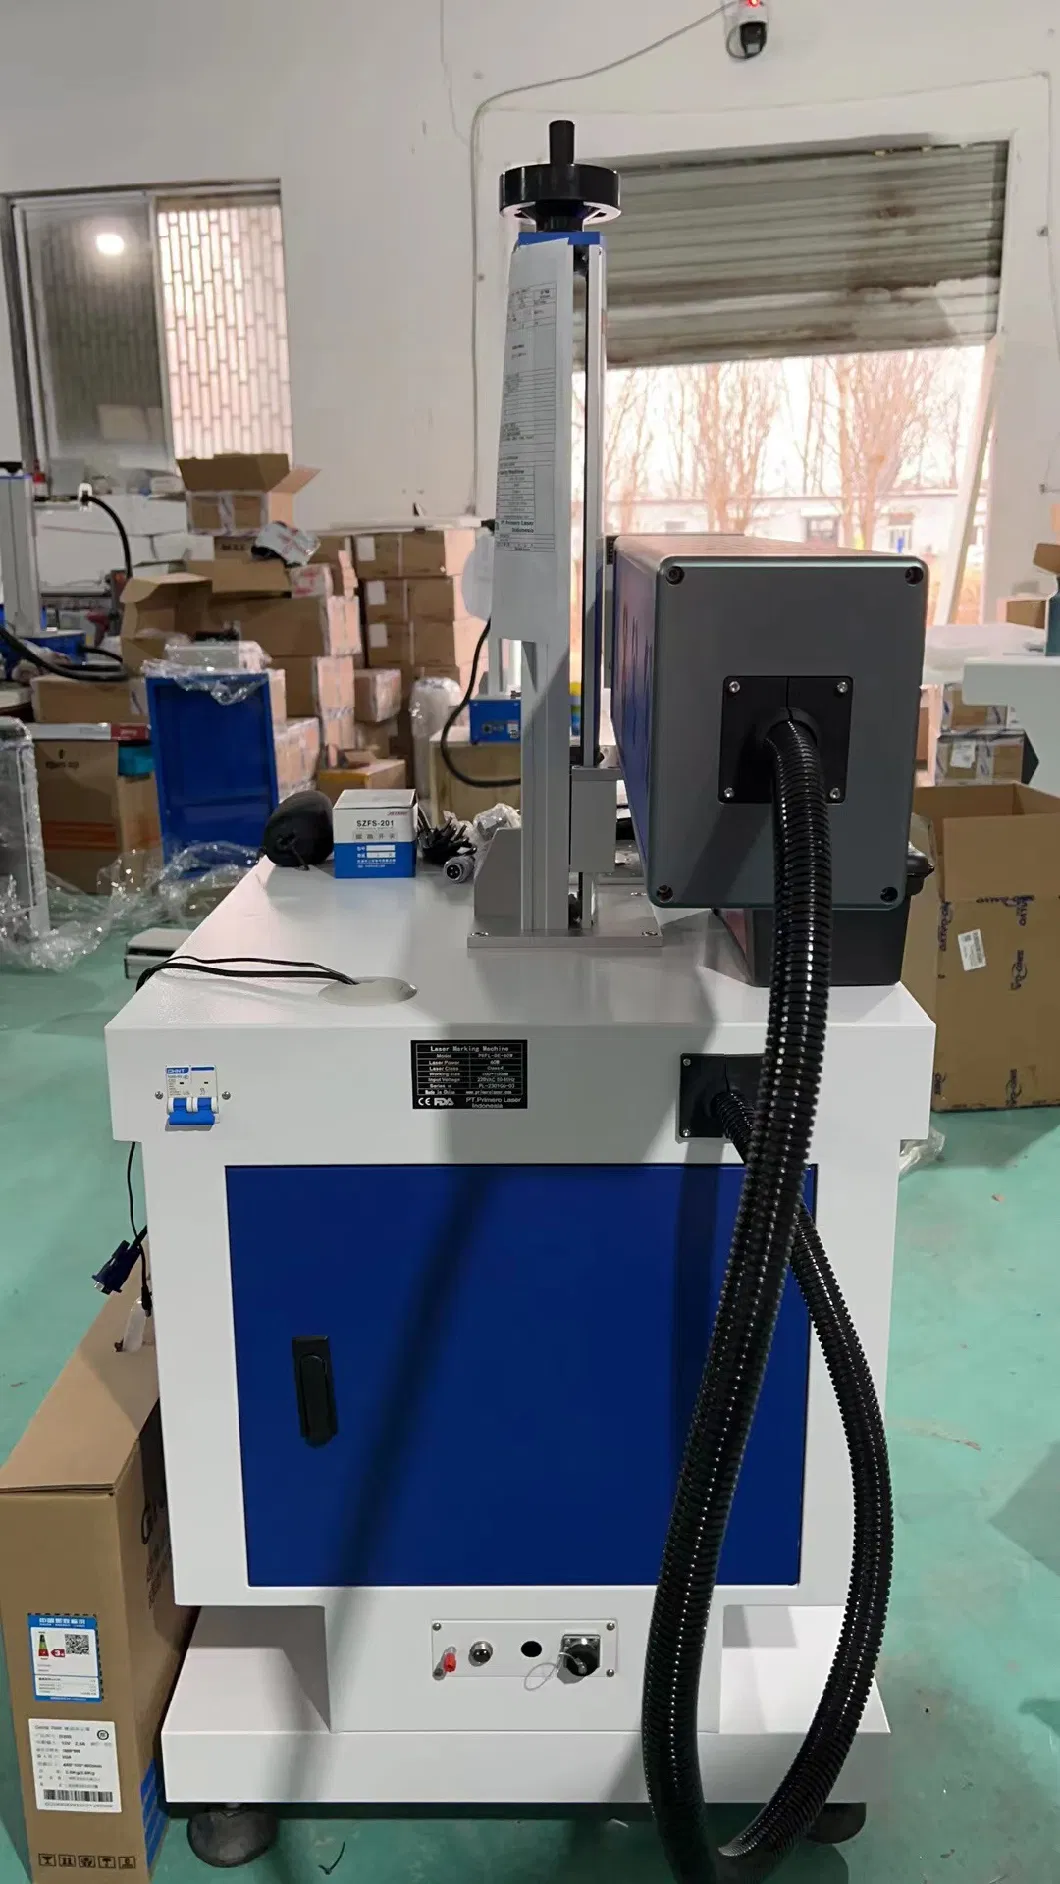 Nanjing Crd Cr40 Desktop CO2 Galvo Laser with Large Size Working Area 300*300mm CO2 Laser Marking Machine